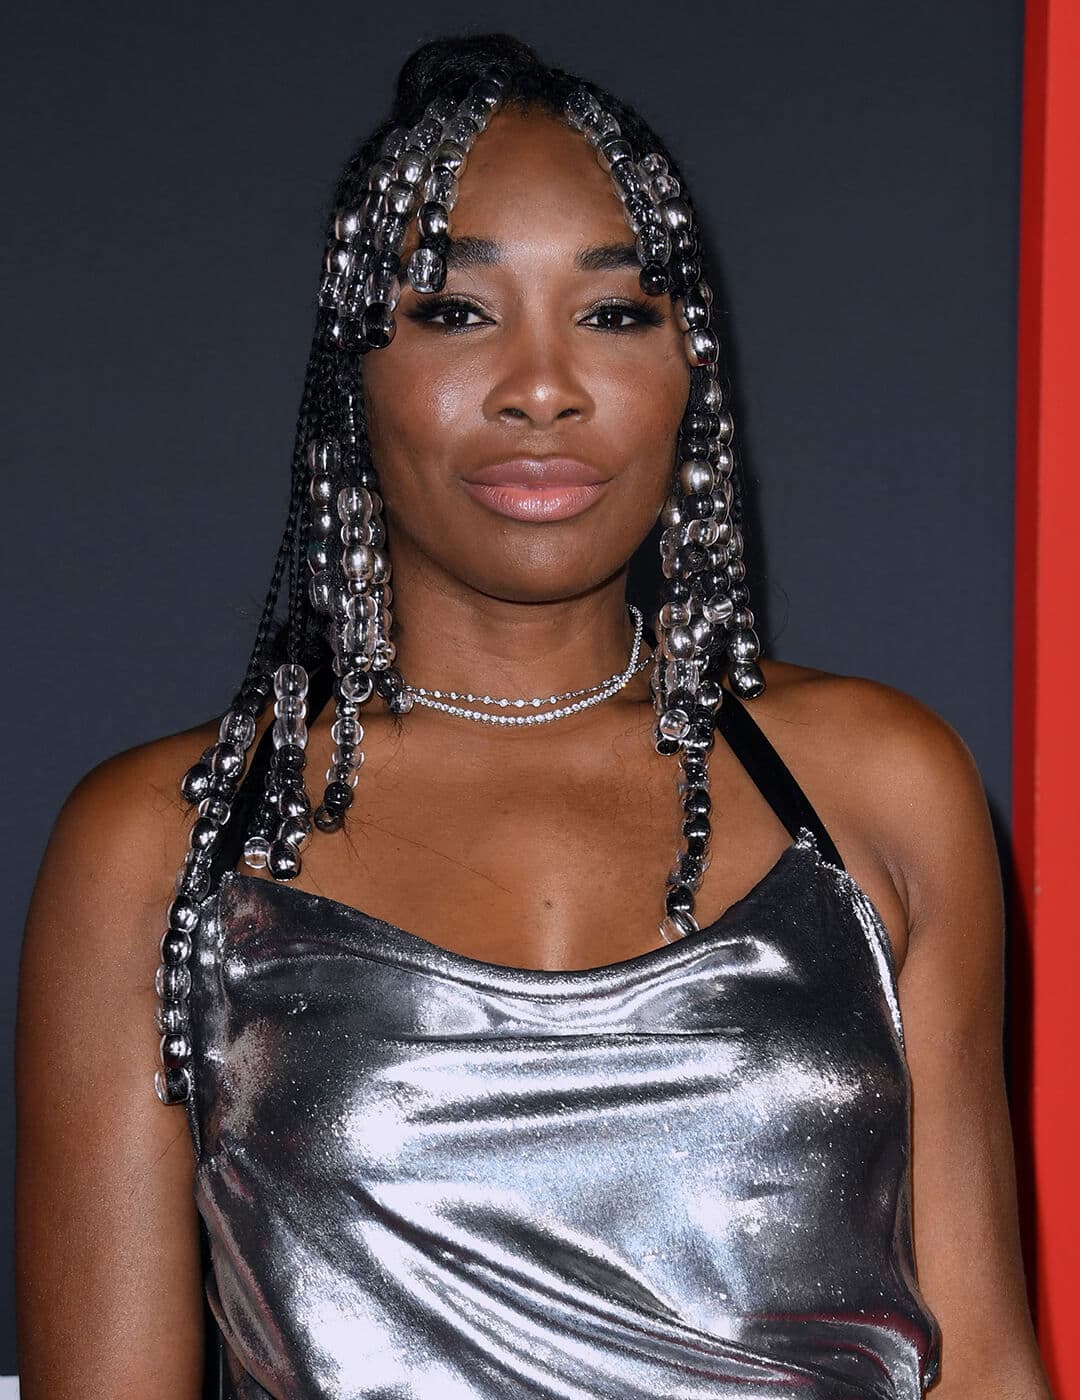 Venus Williams rocking a beaded and braided hairstyle and silver dress